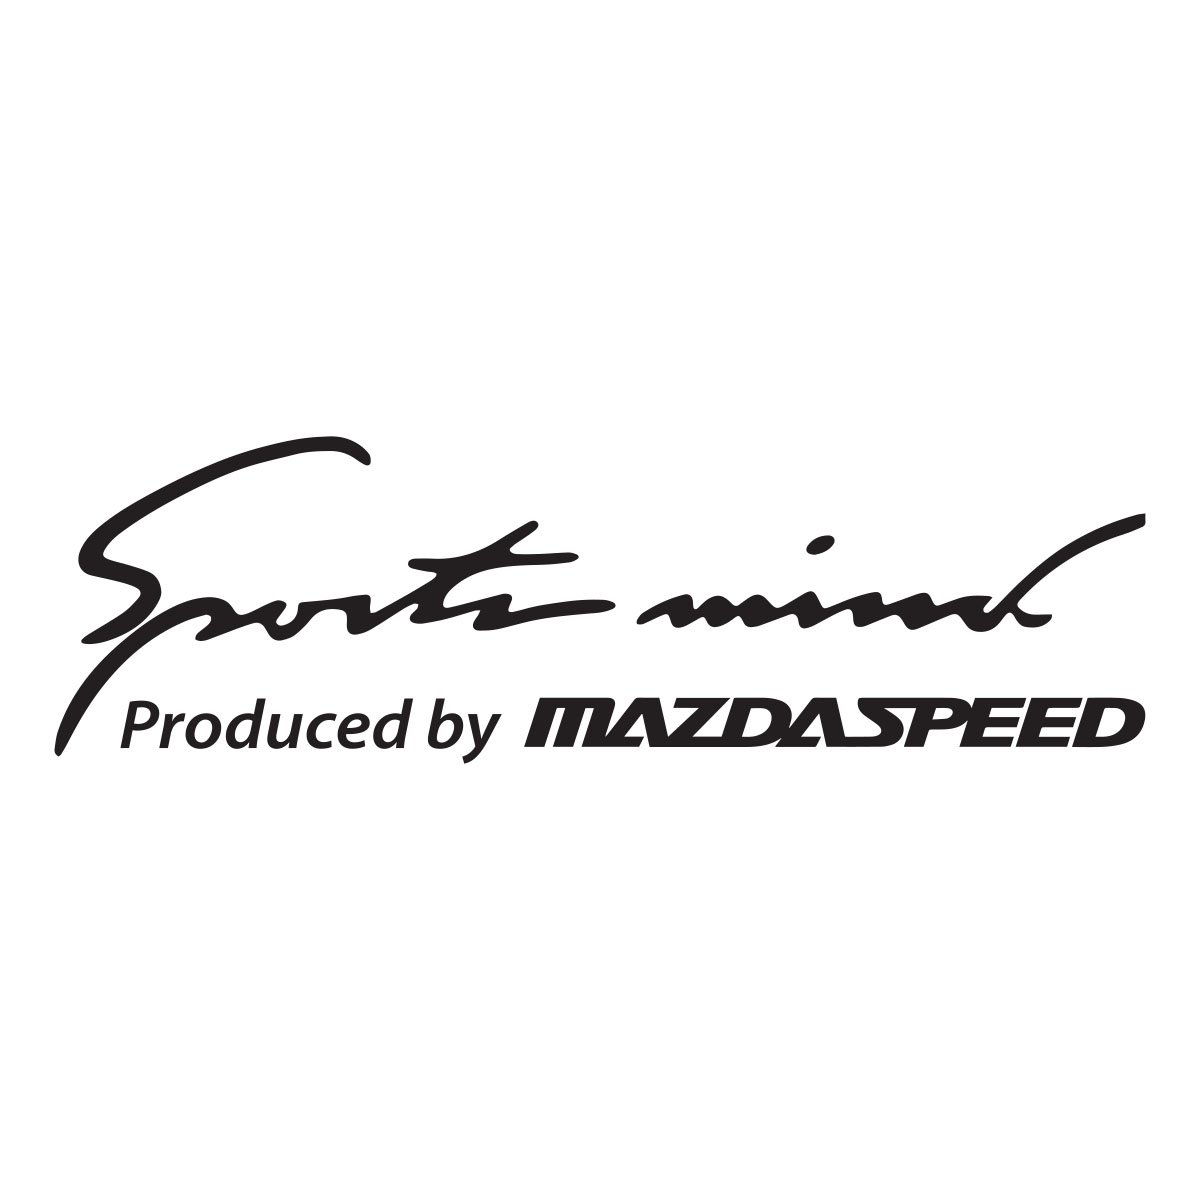 sports mint produced by mazdsspeed